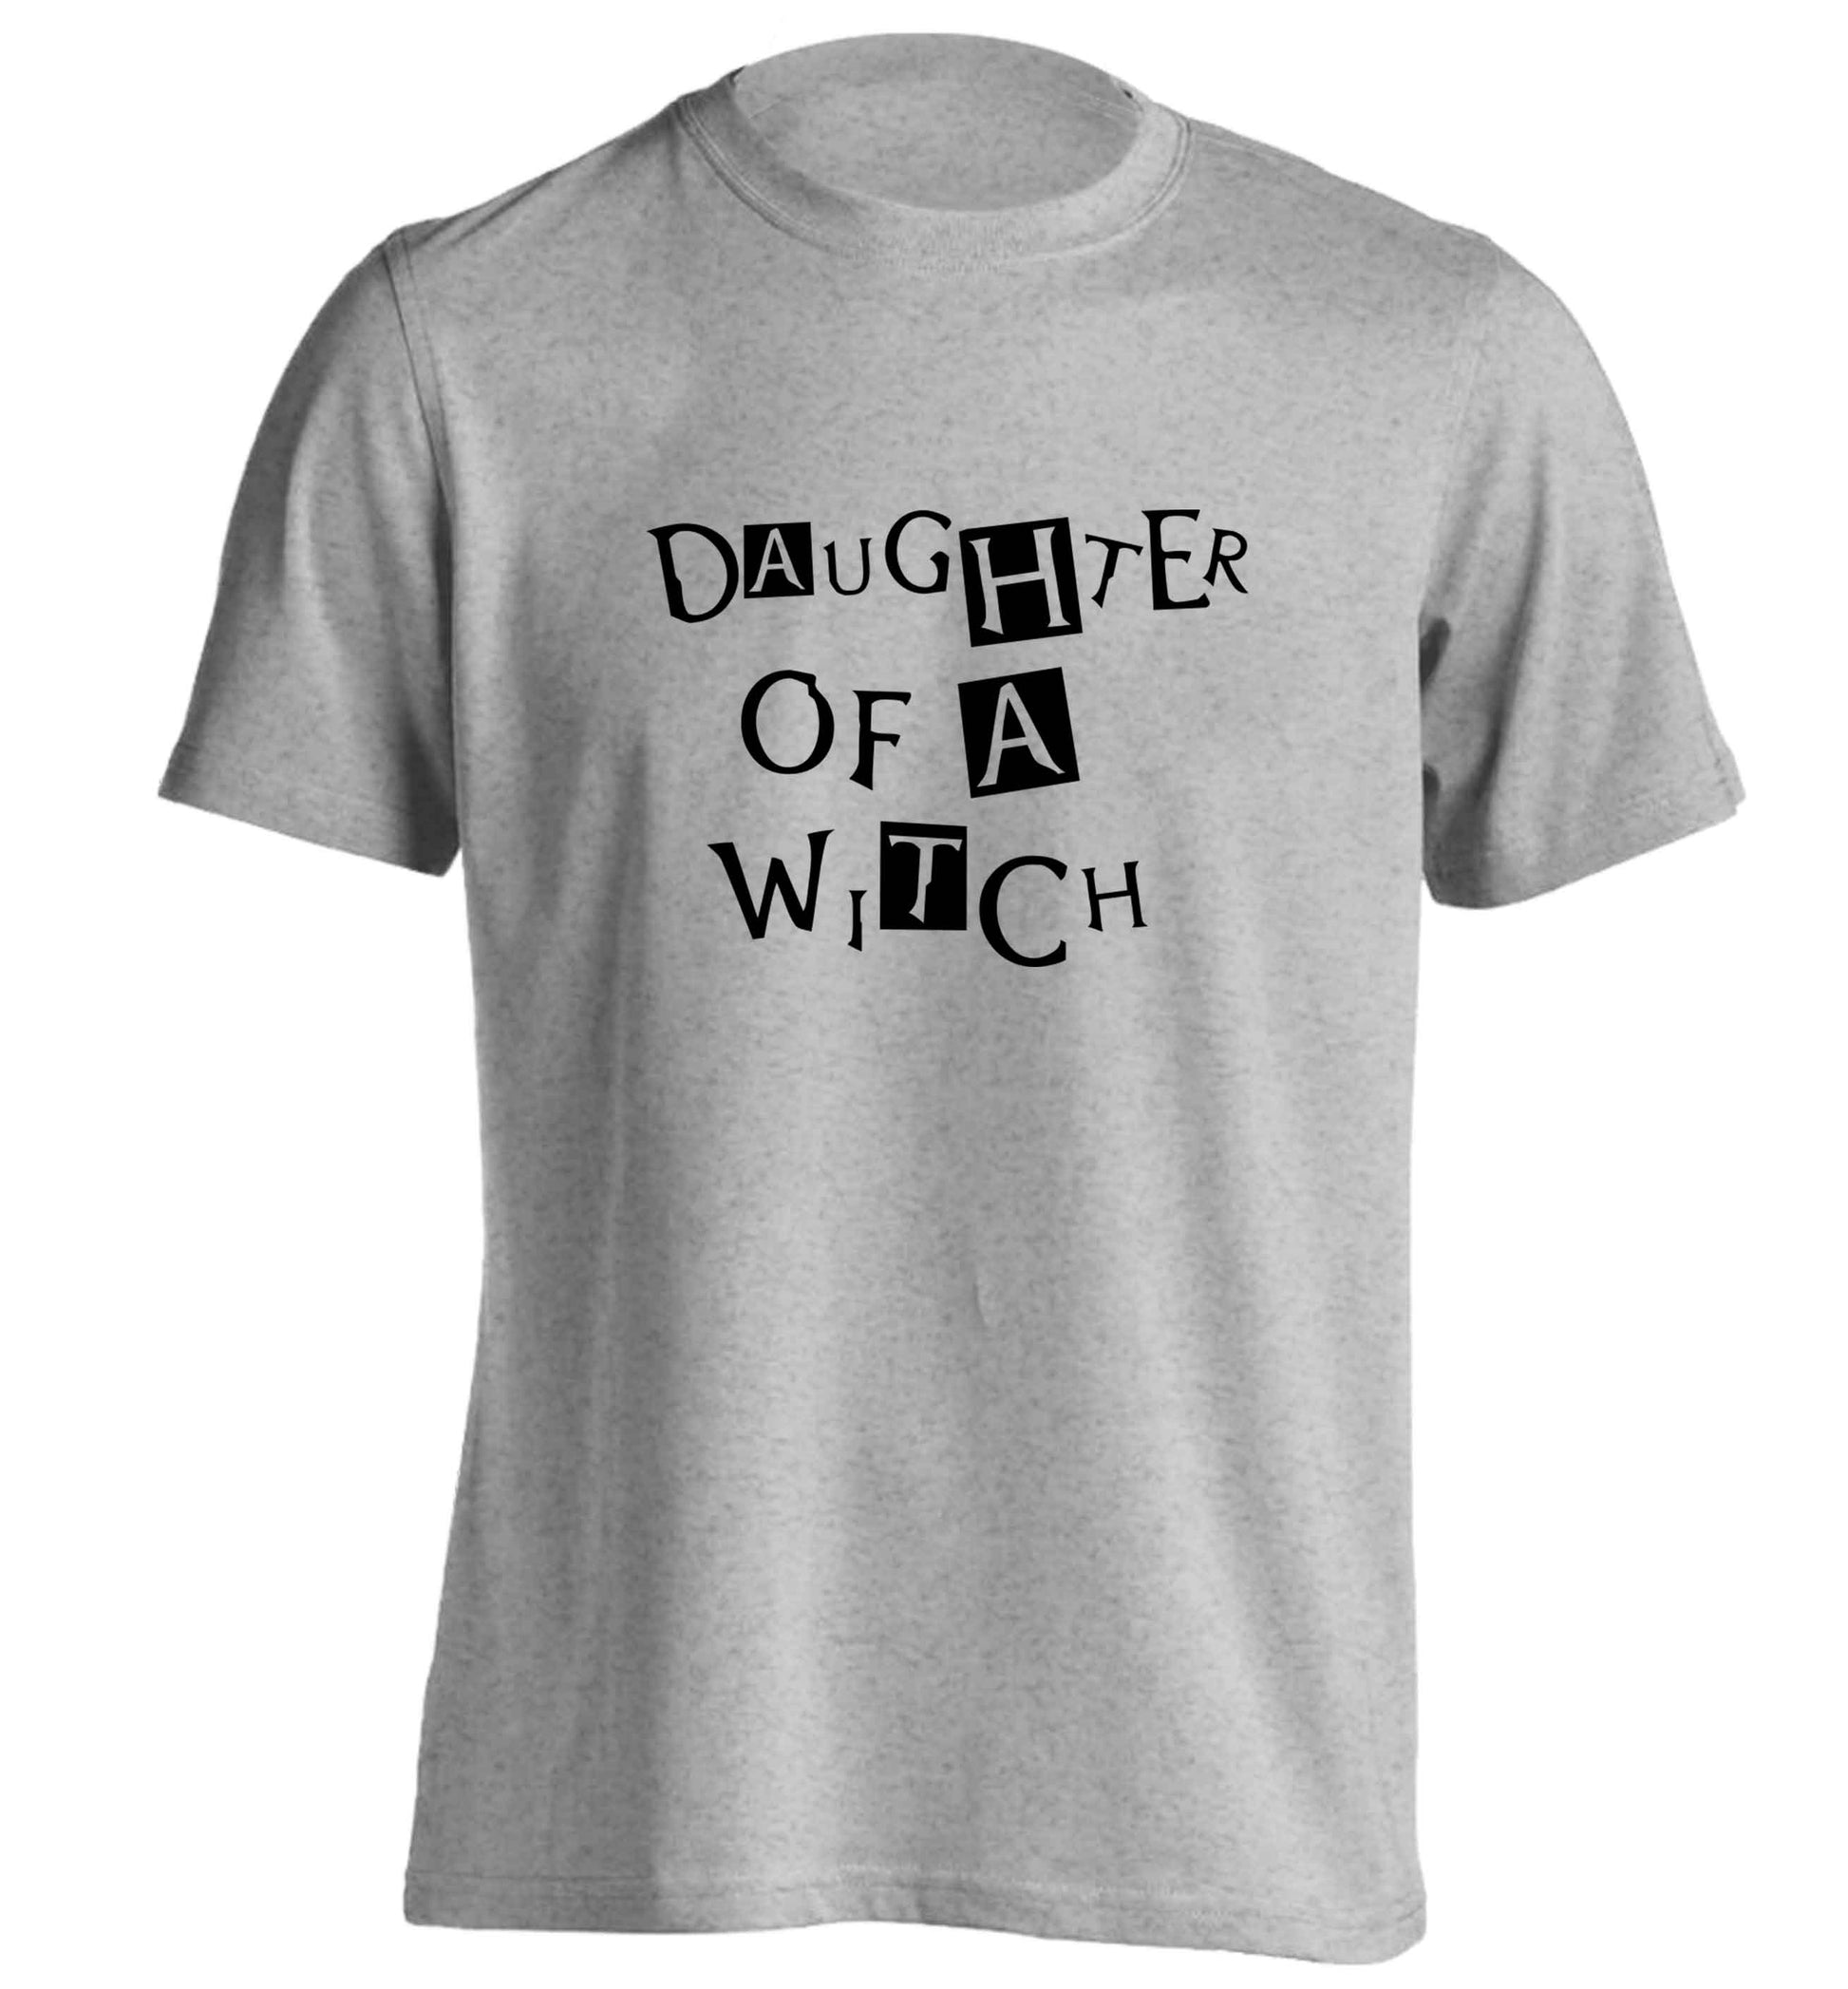 Daughter of a witch adults unisex grey Tshirt 2XL